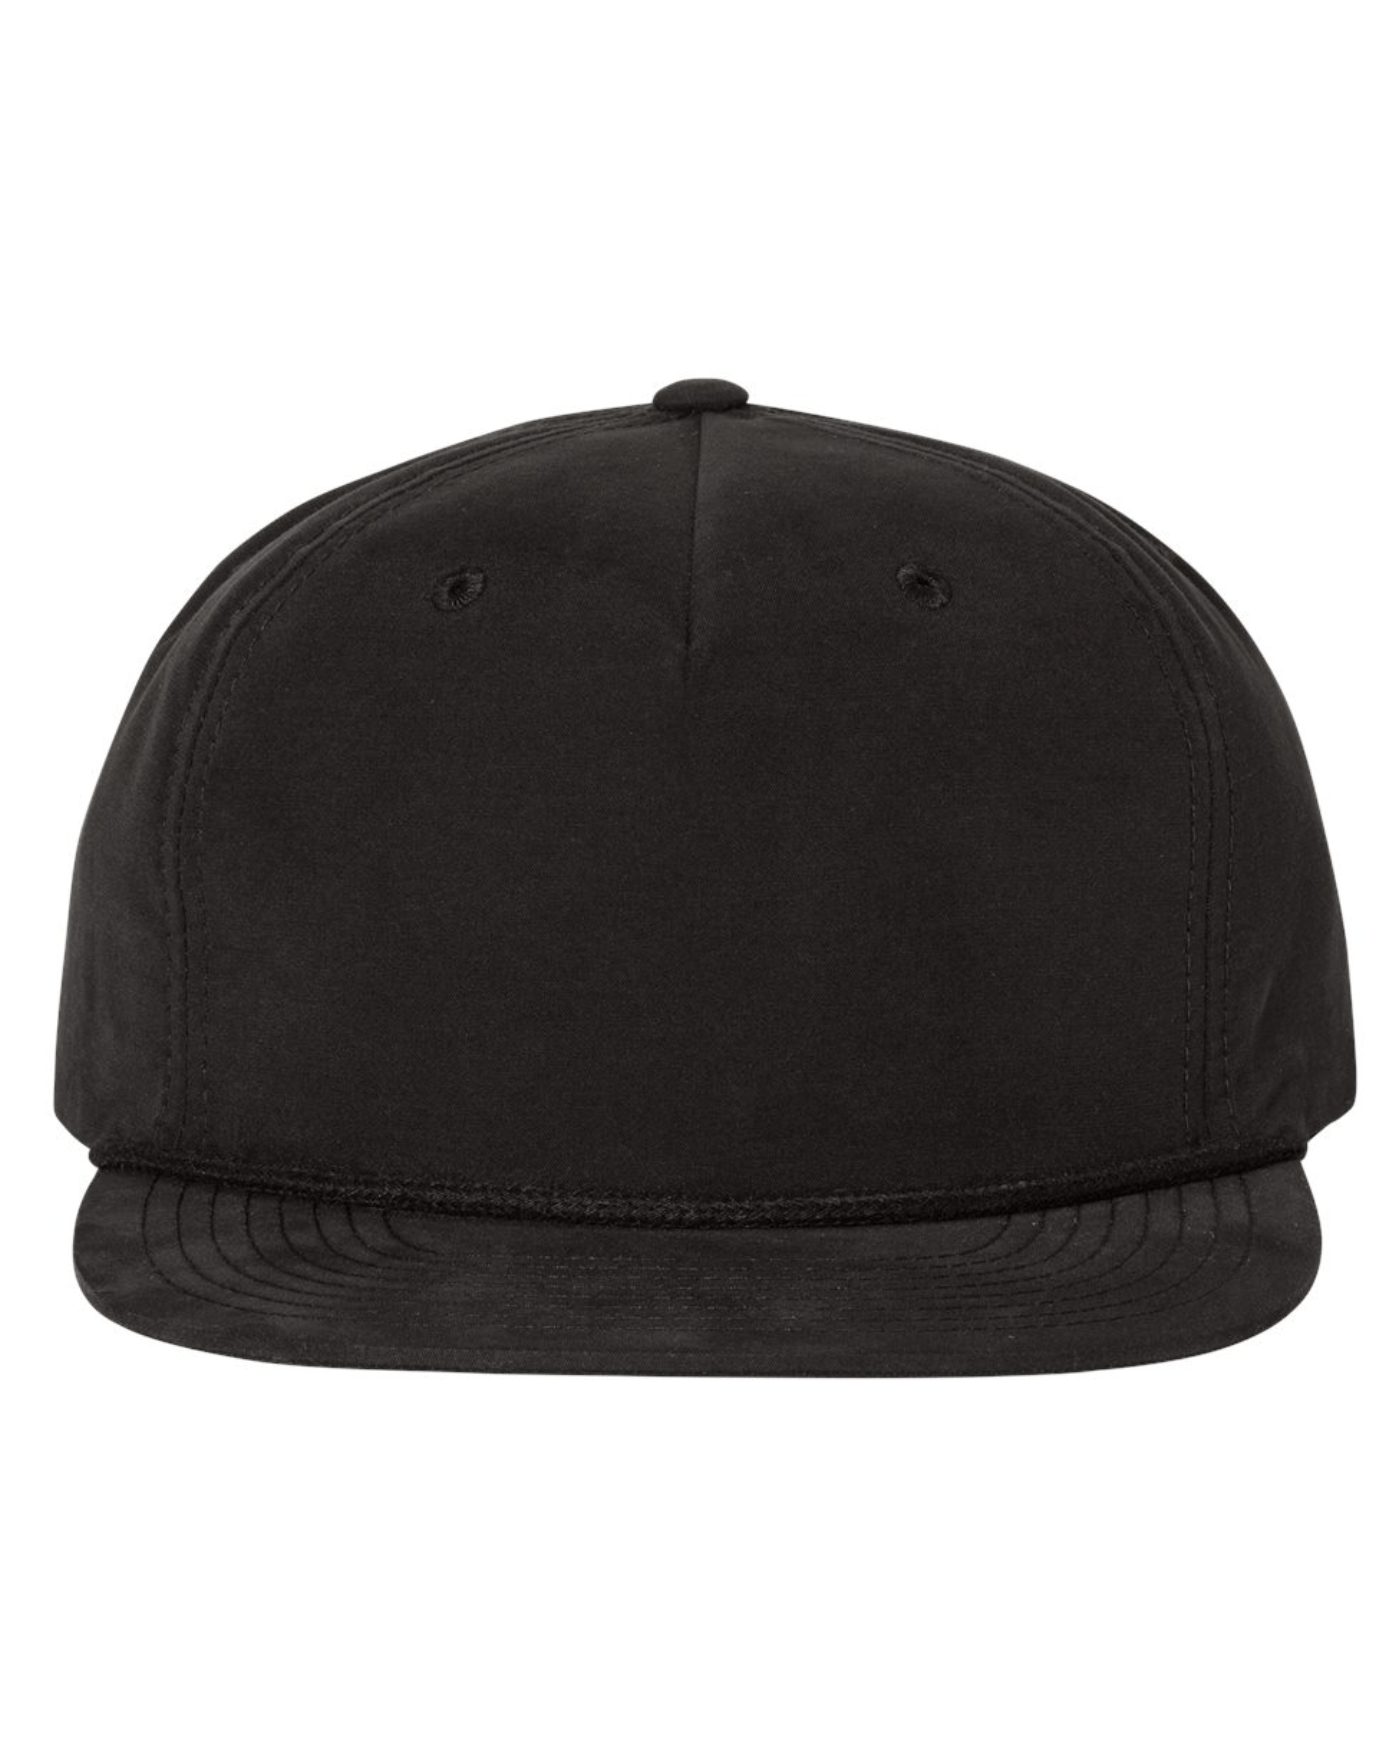 Flatbill Unstructured Rope Style Blank Snapbacks